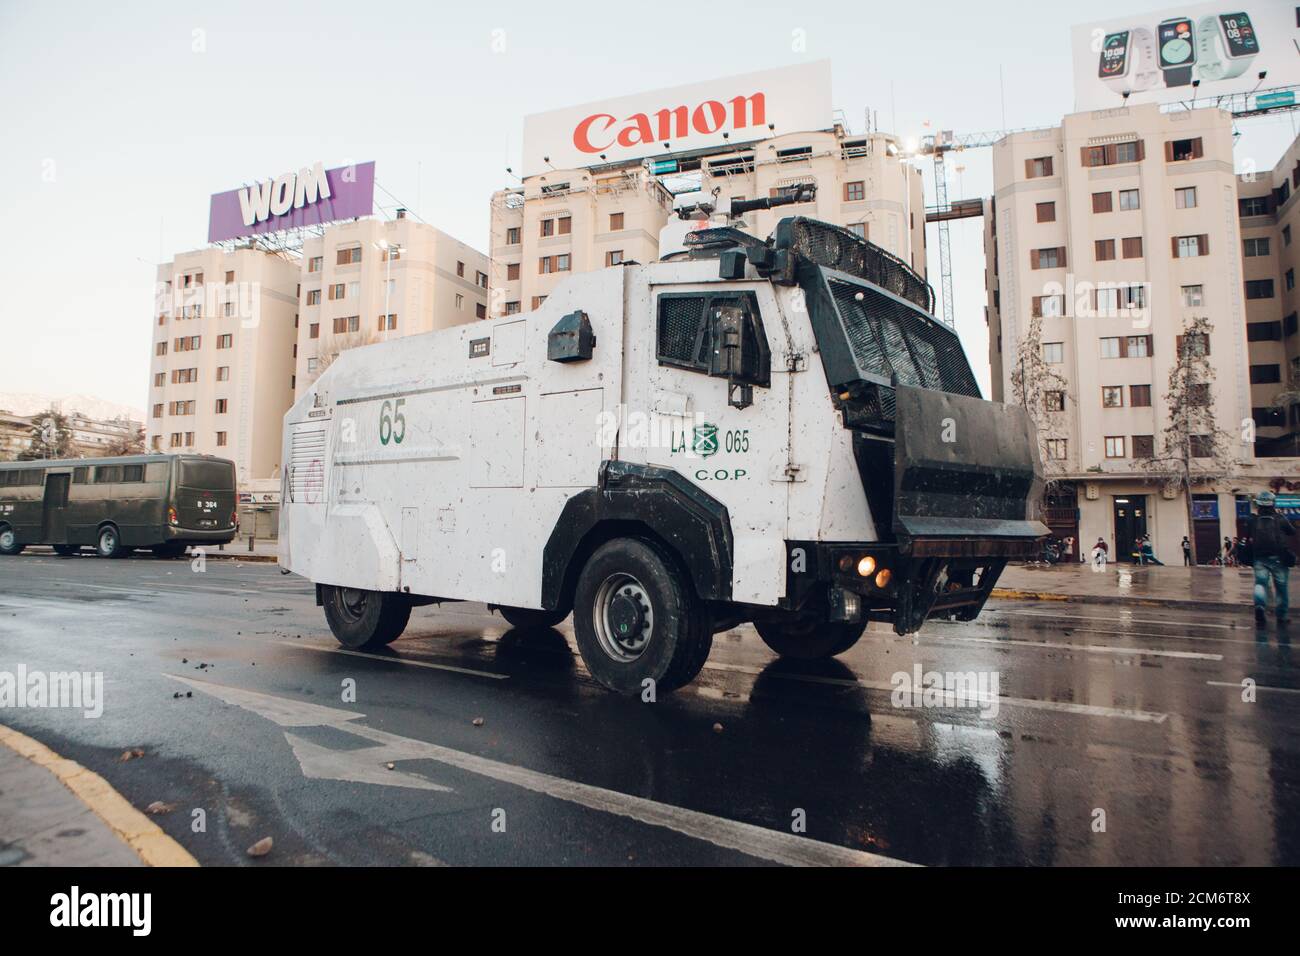 SANTIAGO, CHILE - SEPTEMBER 11, 2020 - A police water cannon disperses protesters against Sebastian Pinera's government. Hundreds of people came to th Stock Photo